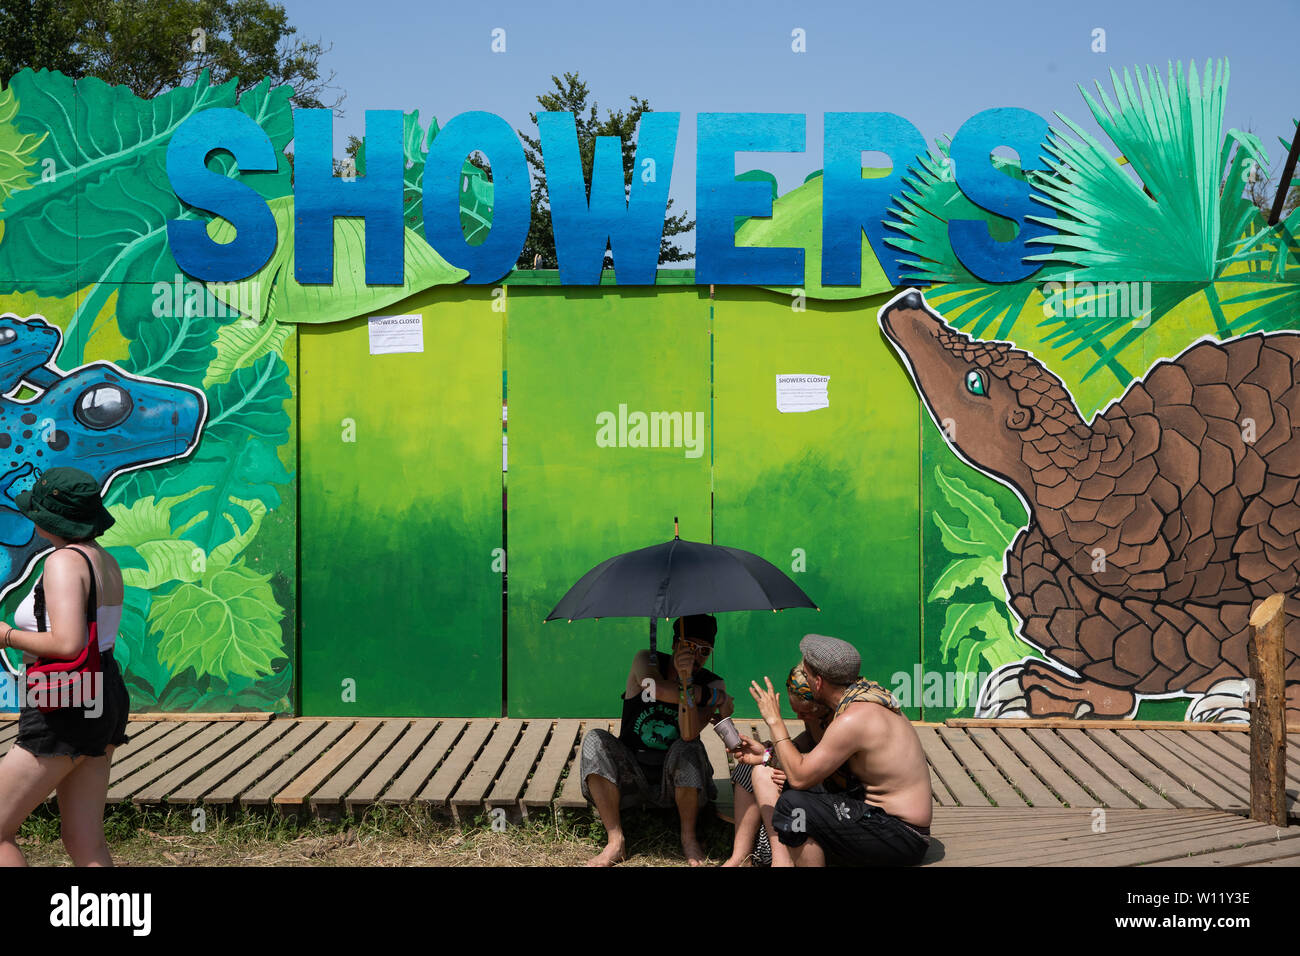 the-greenpeace-showers-shut-to-let-reservoirs-refill-at-glastonbury-festival-at-worthy-farm-in-pilton-somerset-W11Y3E.jpg